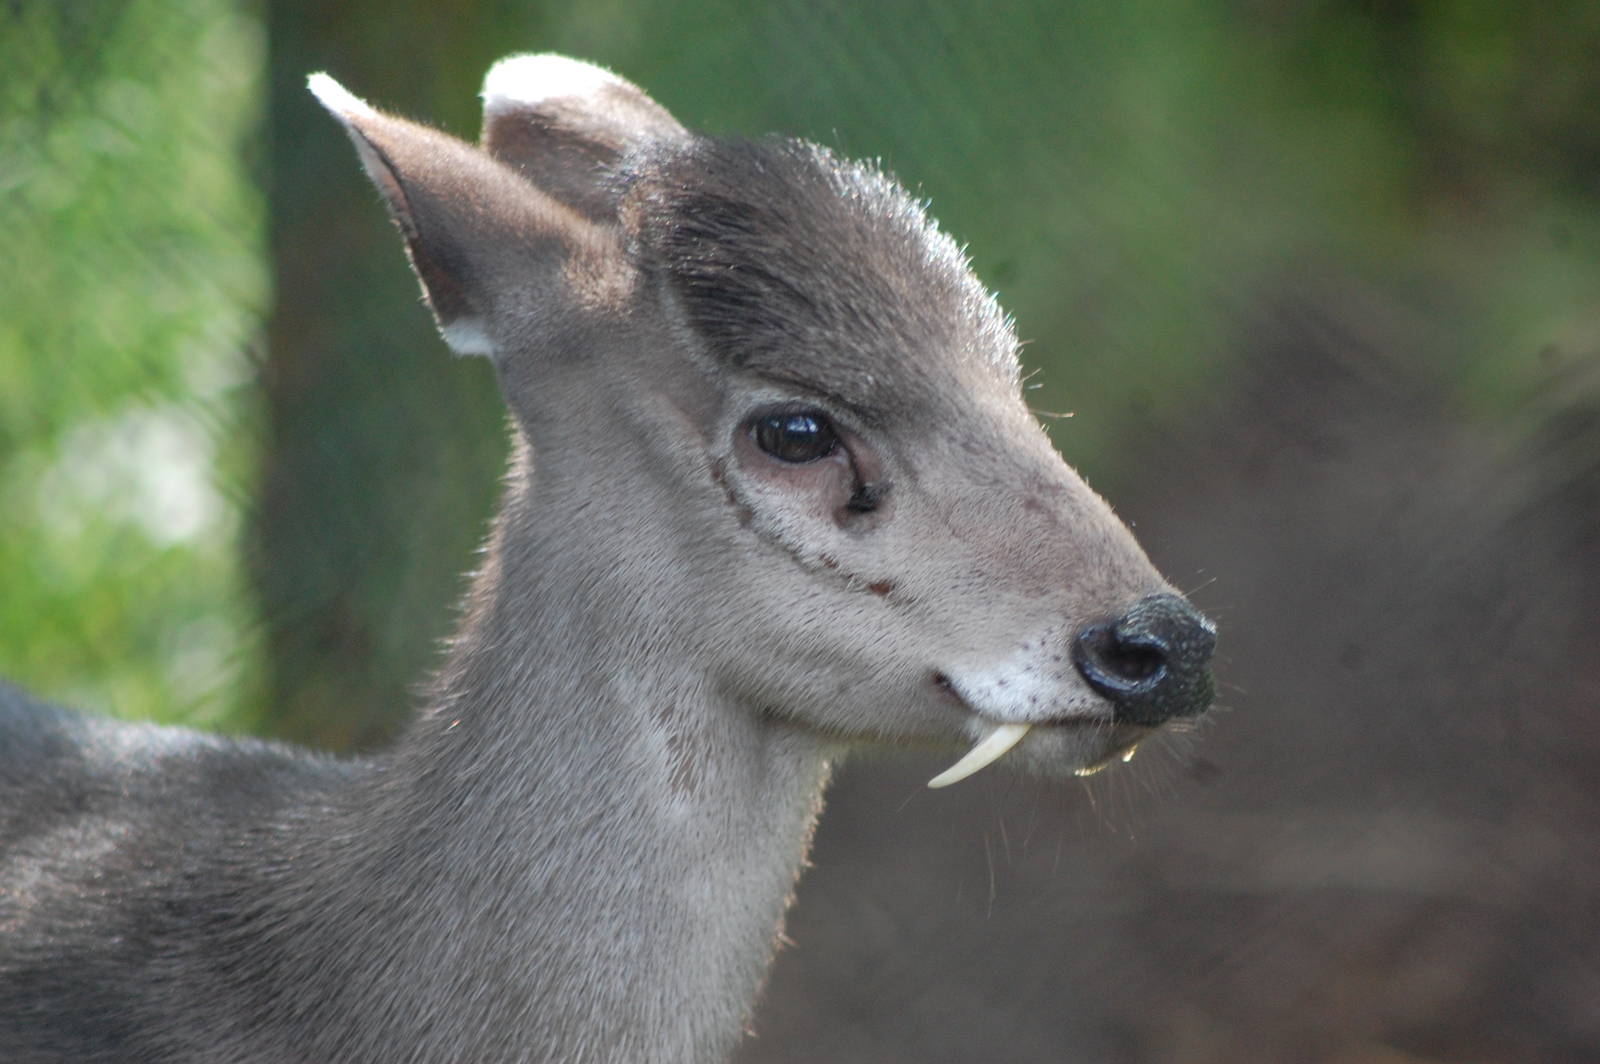 The Tufted Deer is a small species of deer characterized by the prominent tuft of black hair on its forehead. It is a close relative of the muntjac, living somewhat further north over a wide area of central China.  It is a timid animal, mainly solitary or found in pairs and prefers places with good cover, where it is well camouflaged.